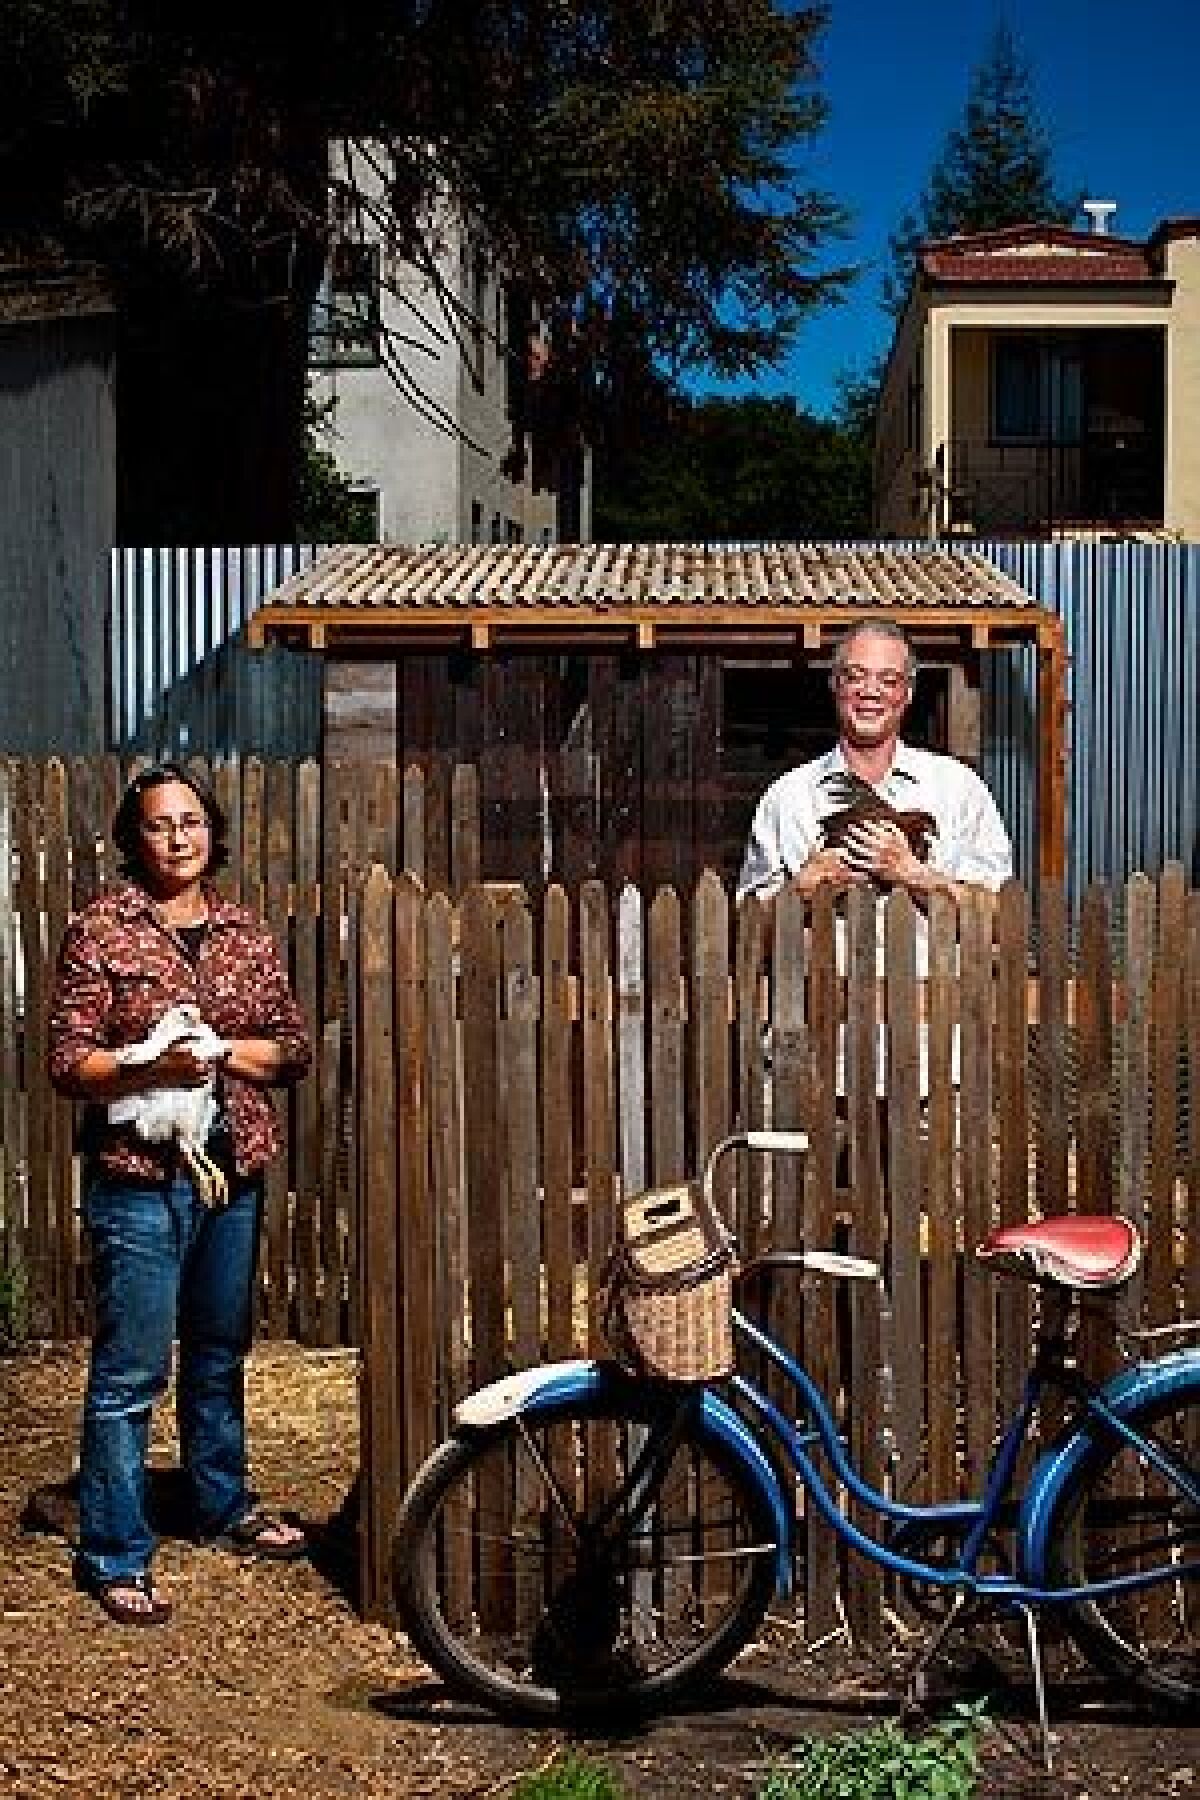 Architects Catherine Chang and Chris Andrews pose for a portrait in front of the chicken coop they designed for Pizzaiolo restaurant in Oakland. The chickens, all exotic breeds, lay eggs that are later served to patrons. "It's one of the best things I've ever done," Andrews said. "It's almost too much fun ... we feel a little guilty."